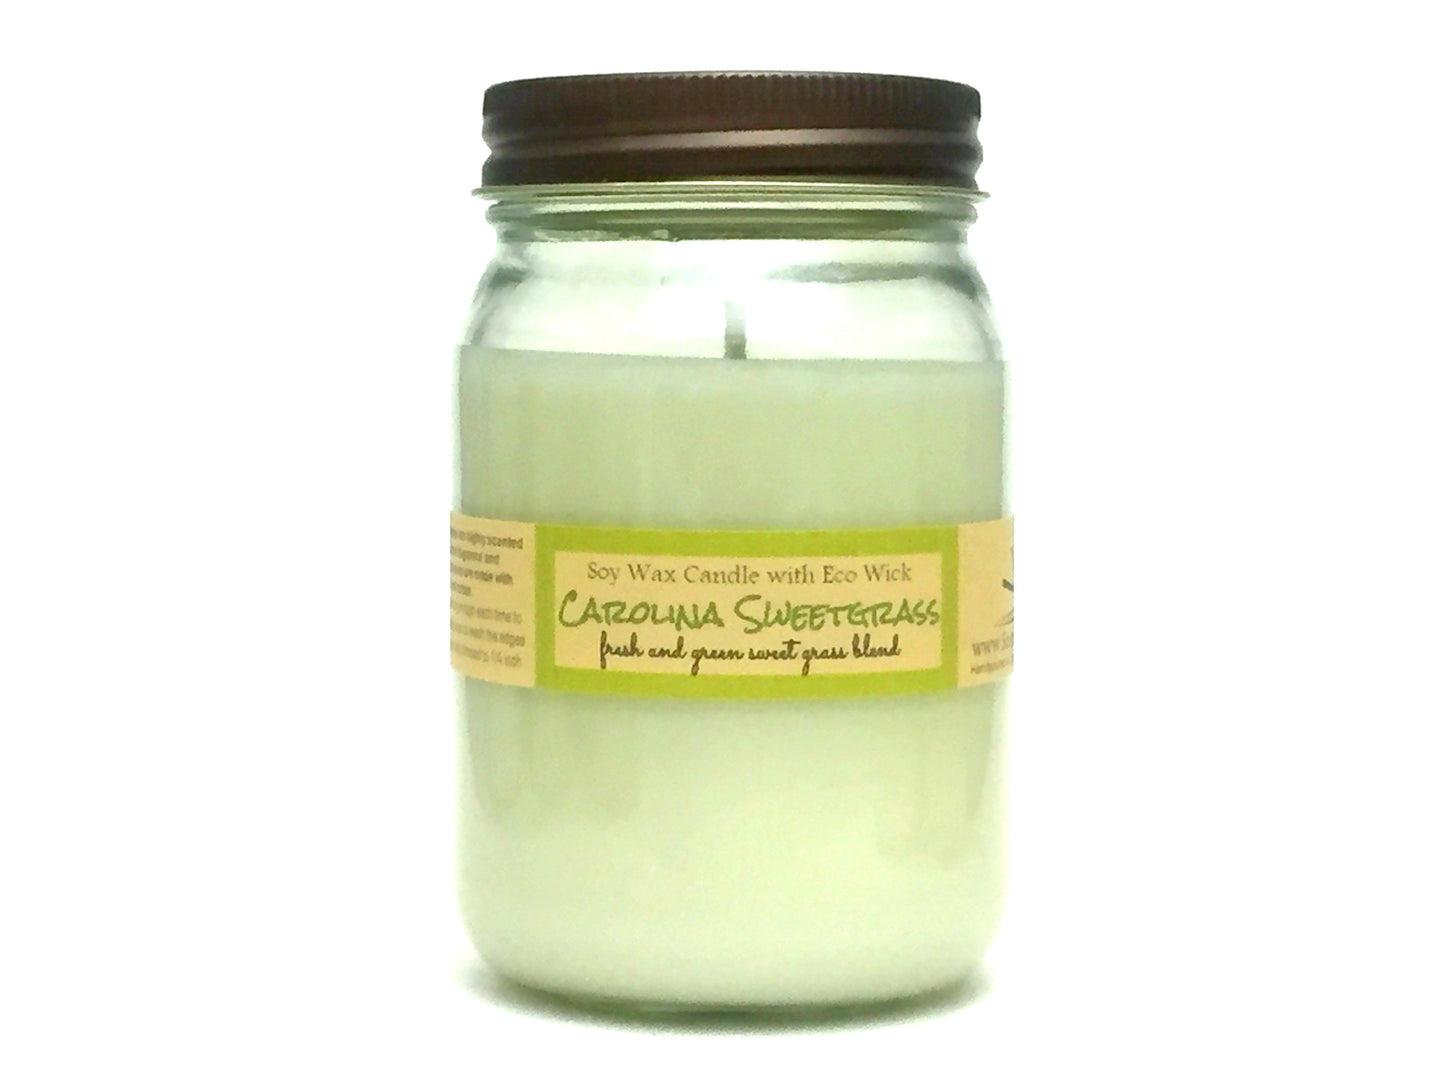 Carolina Sweet Grass Scented Soy Wax Candle